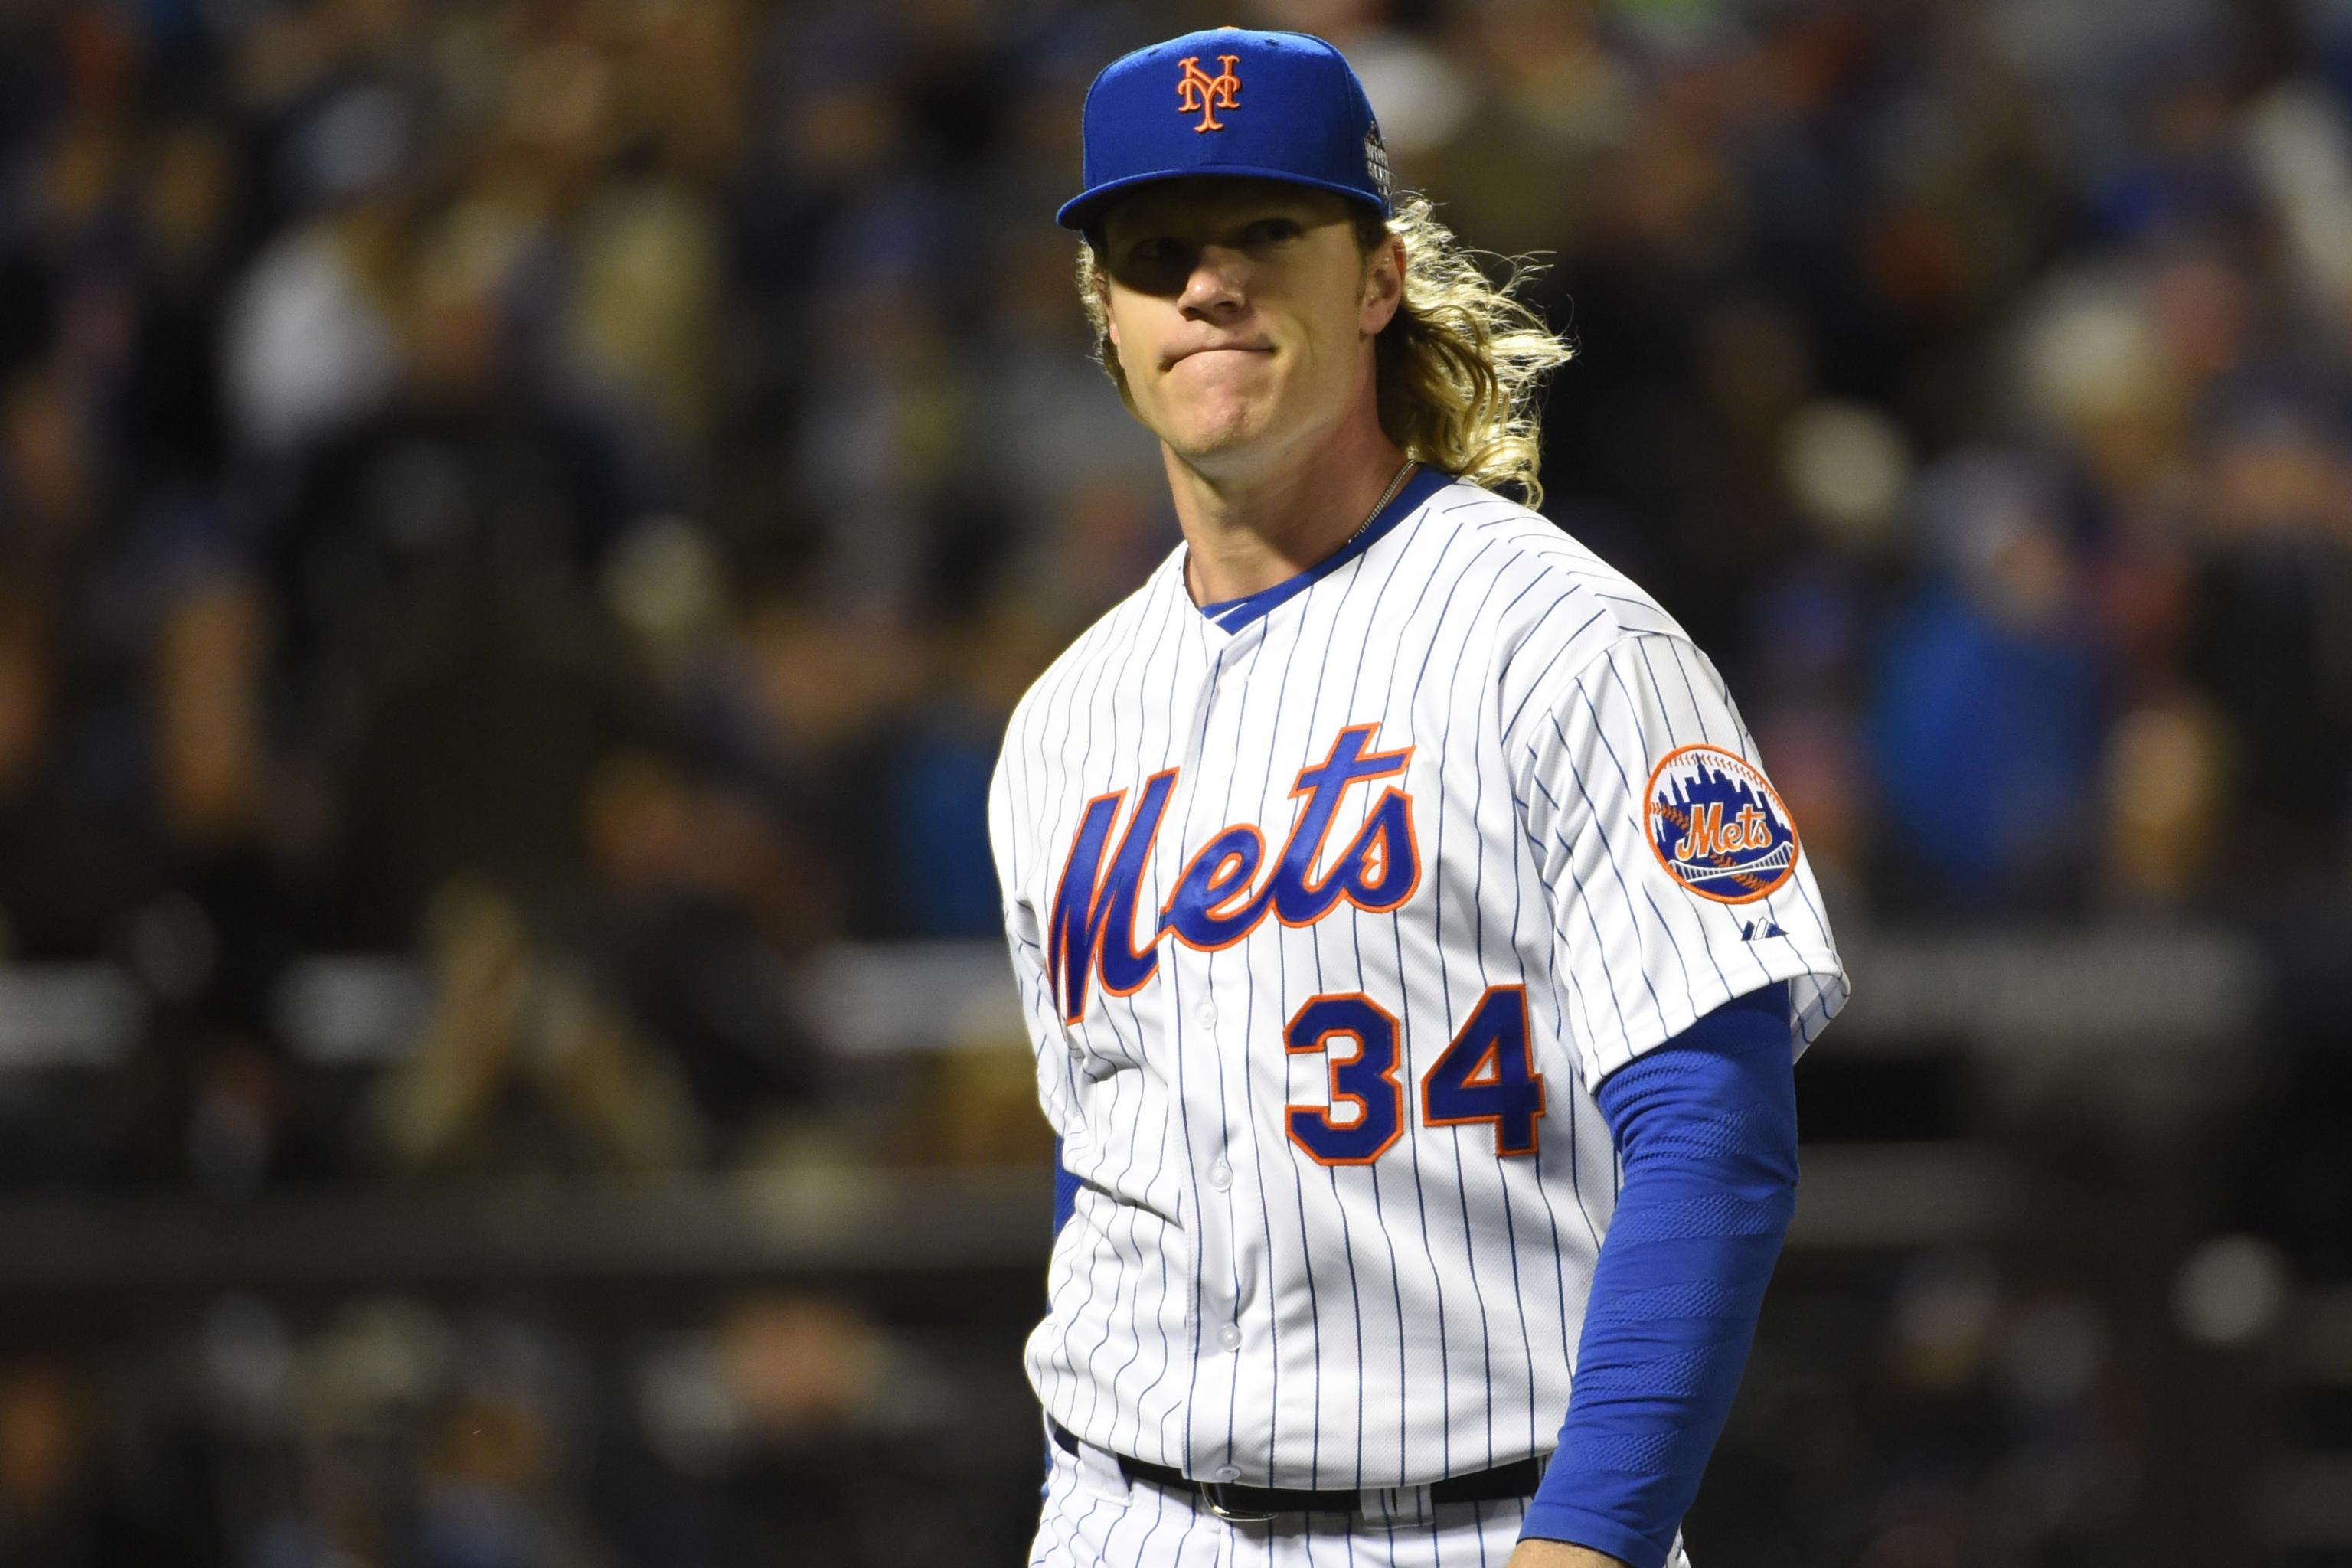 10 ridiculous stats to sum up Noah Syndergaard's Mets dominance